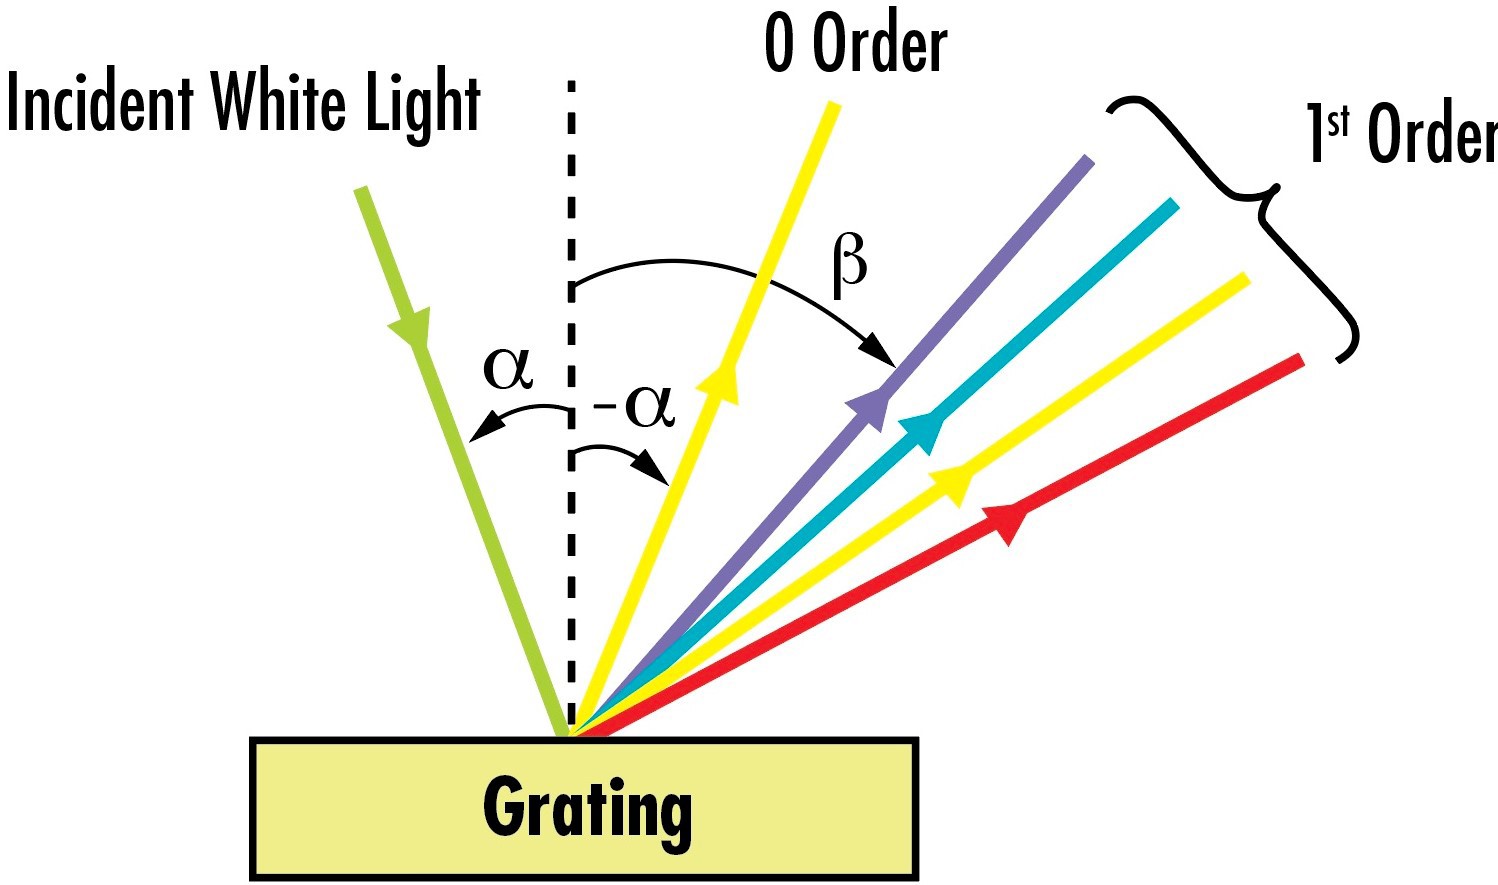 While some light reflects directly off of this grating as “0 order” diffraction, other parts of the incident light are diffracted into 1st order angles based on wavelength. Smaller amounts of the incident light will also be separated into larger 2nd and 3rd orders at higher angles.